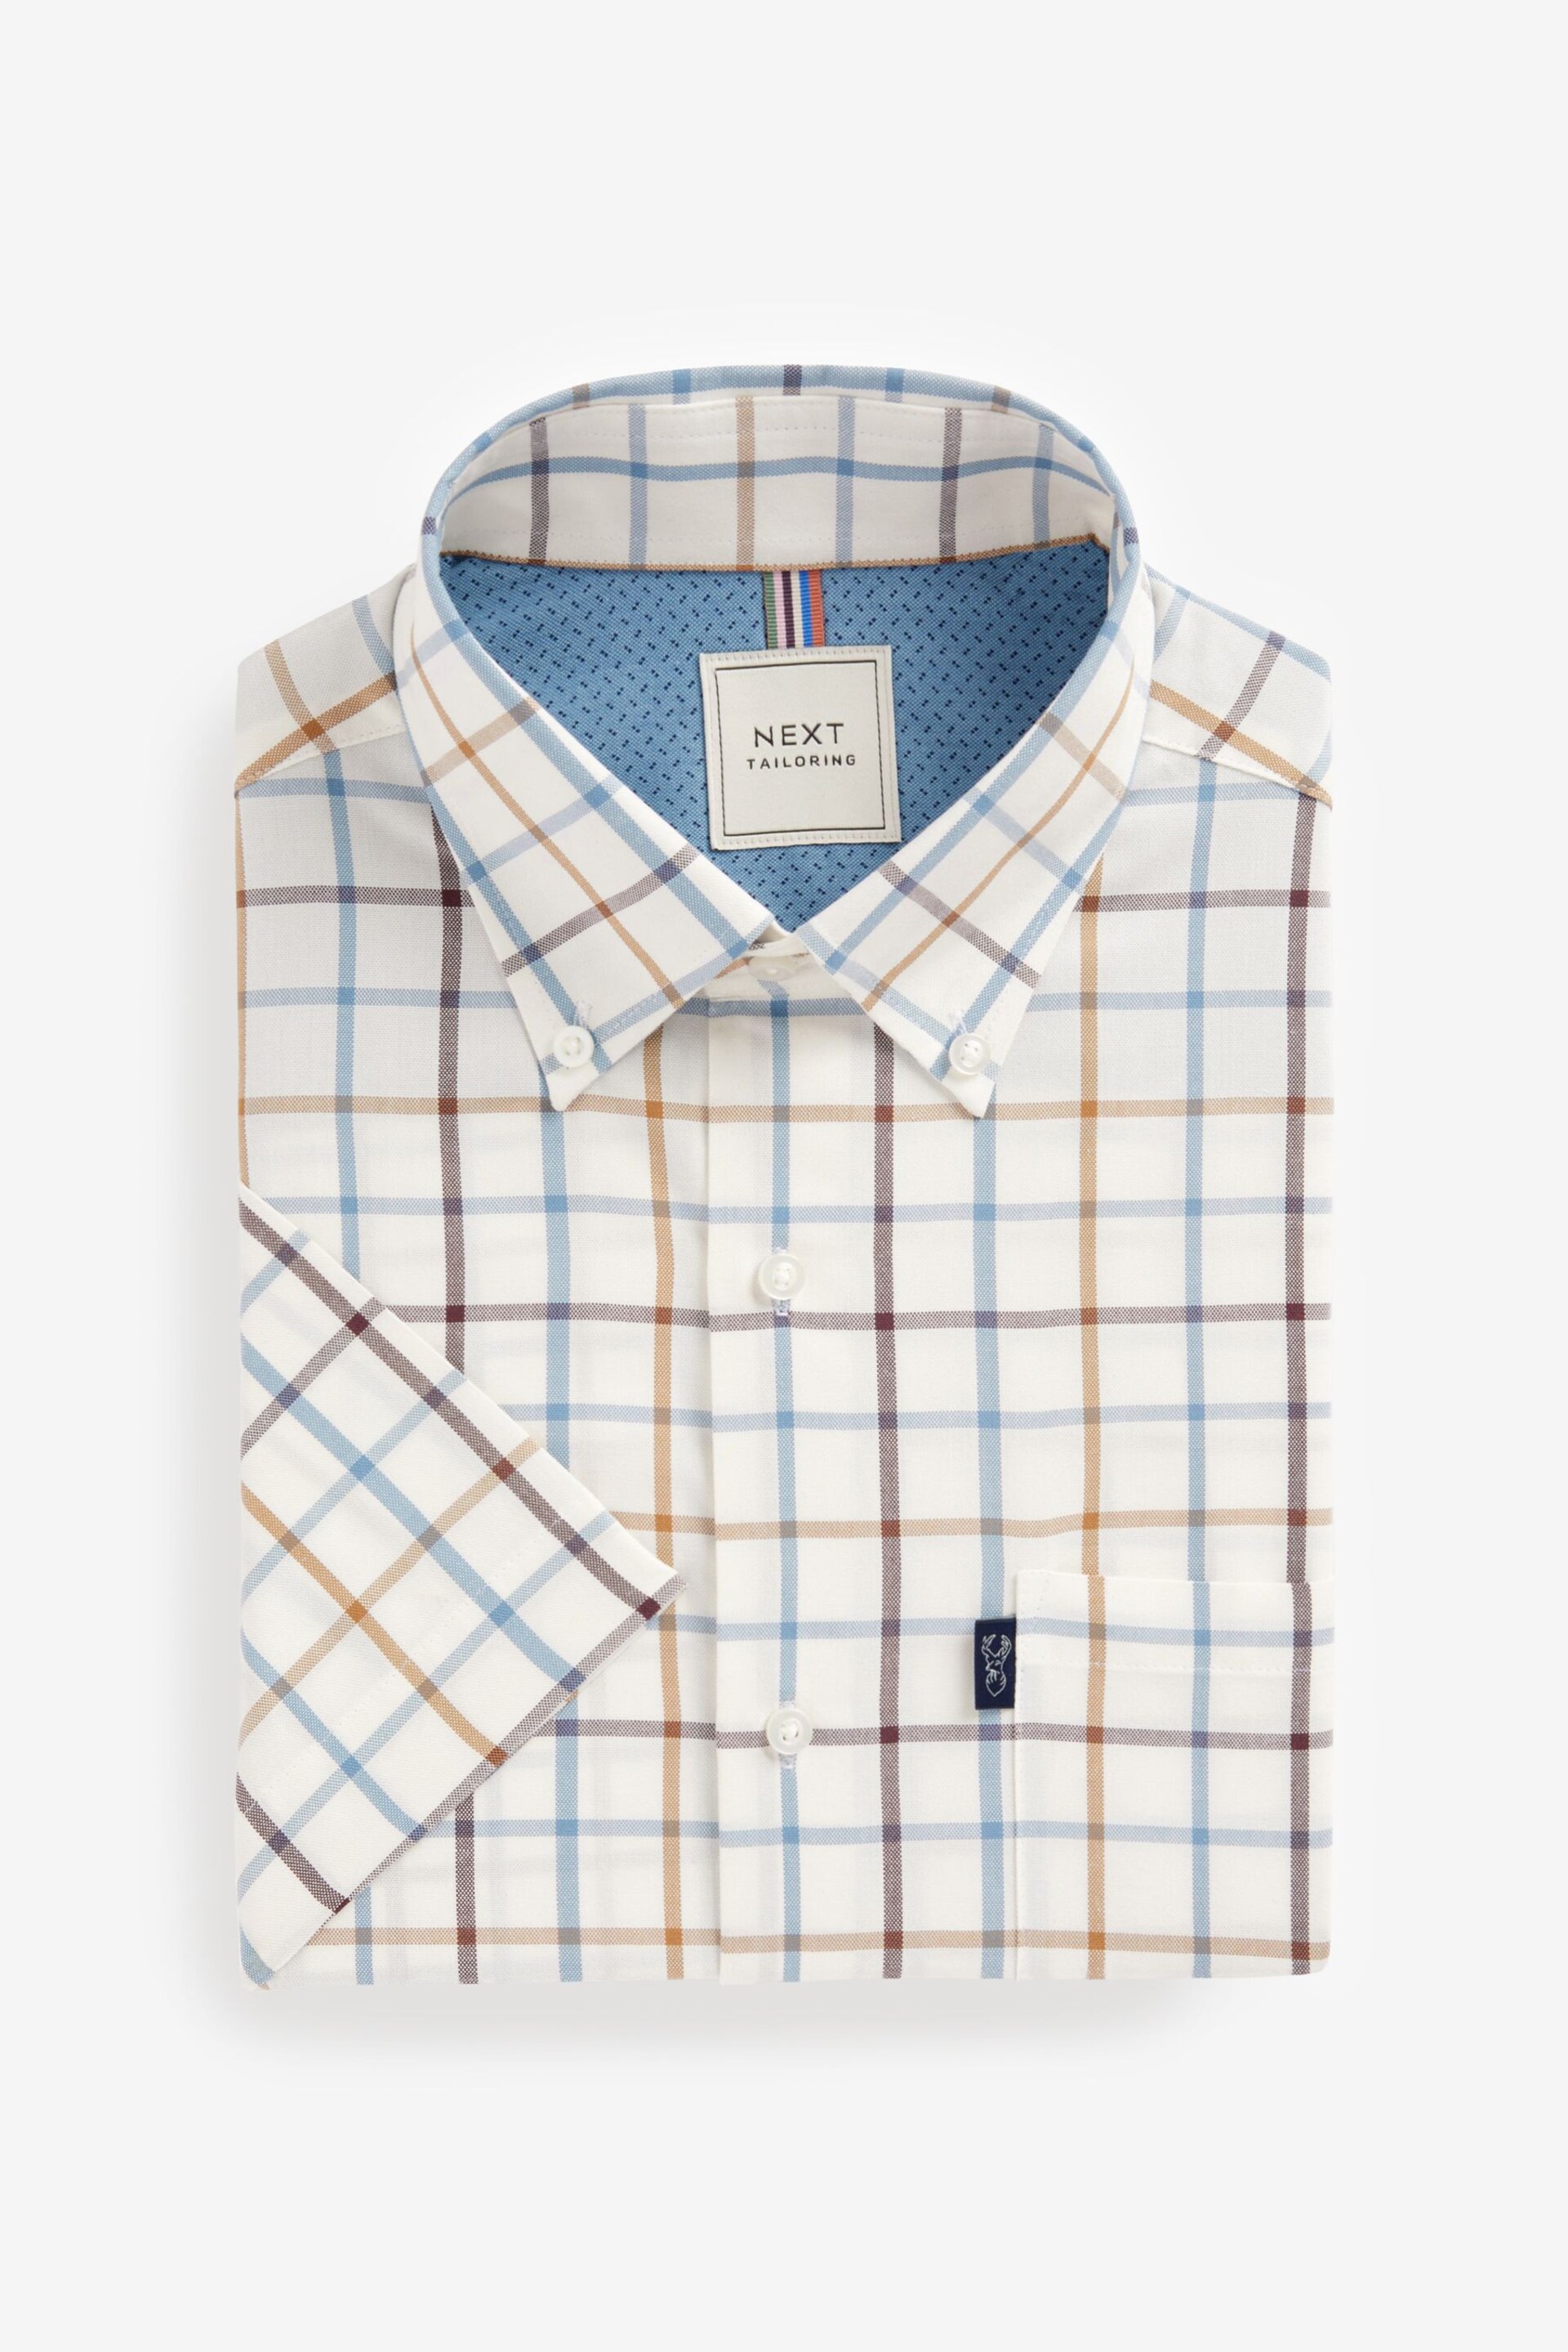 Cream/Blue Tattersall Check Easy Iron Button Down Oxford Shirt - Image 4 of 6